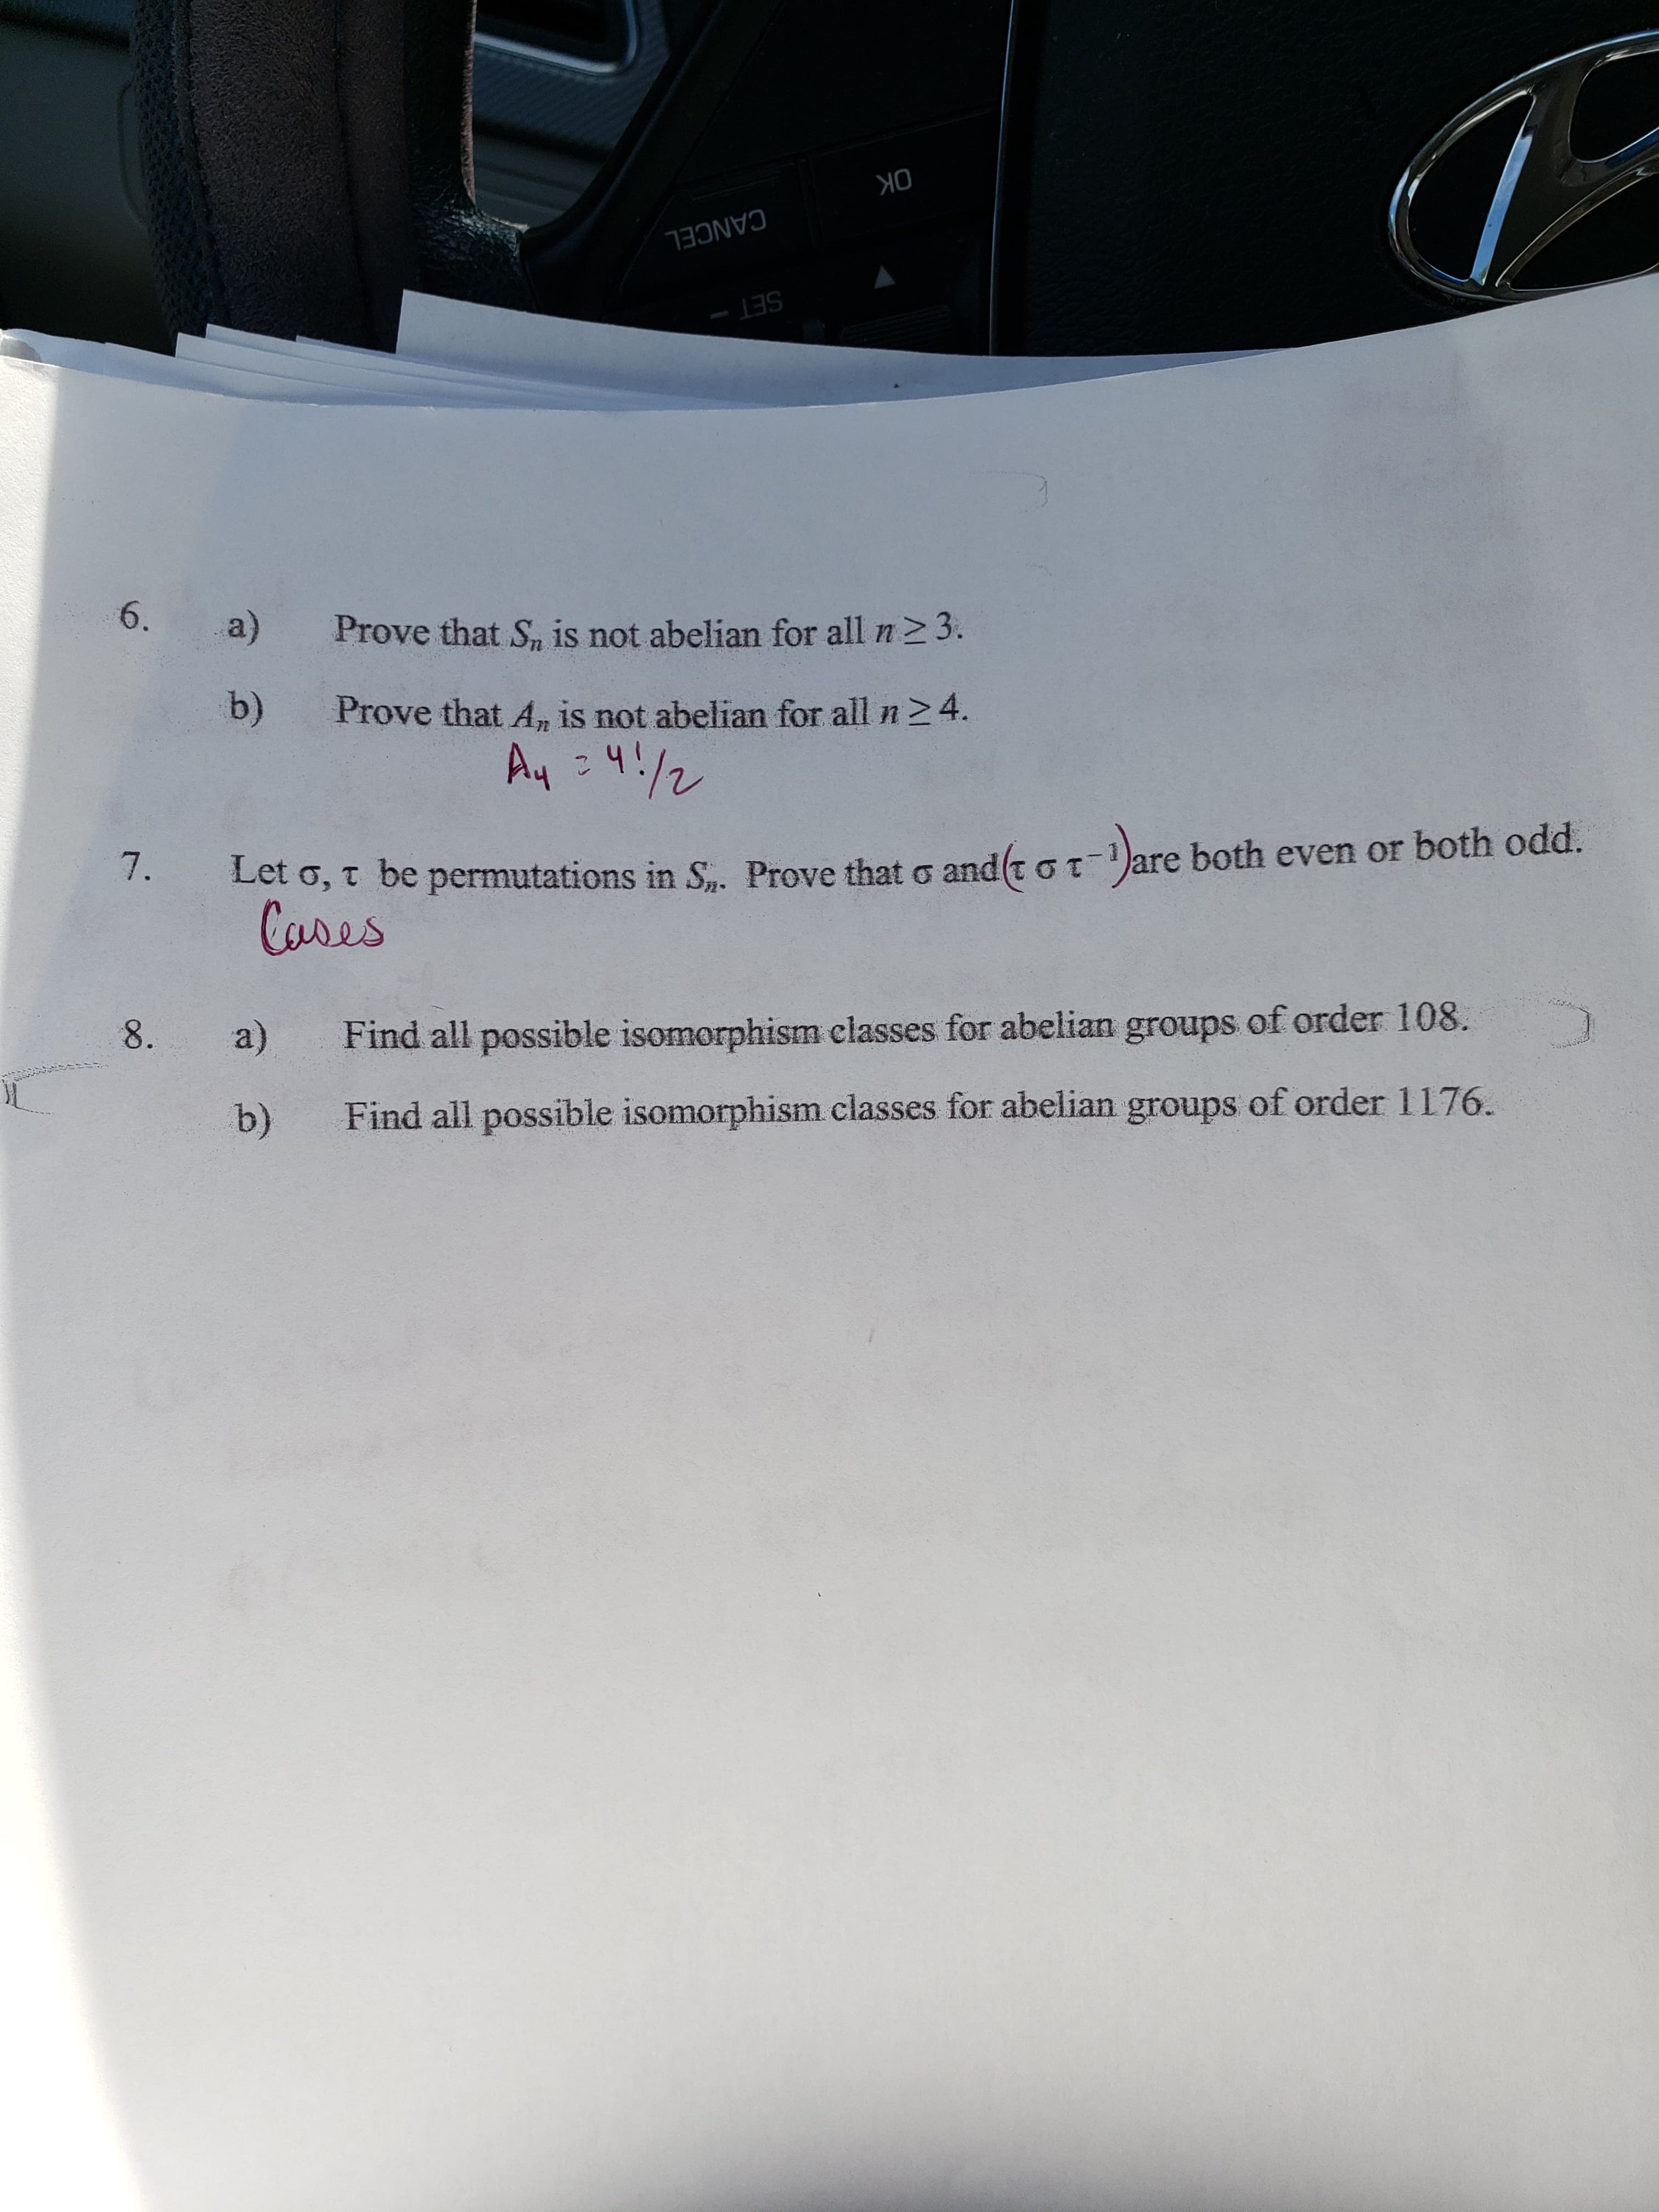 7. Let c
t- are both even or both odd.
Let that o and(t
0, t be permutations in S. Prove t
